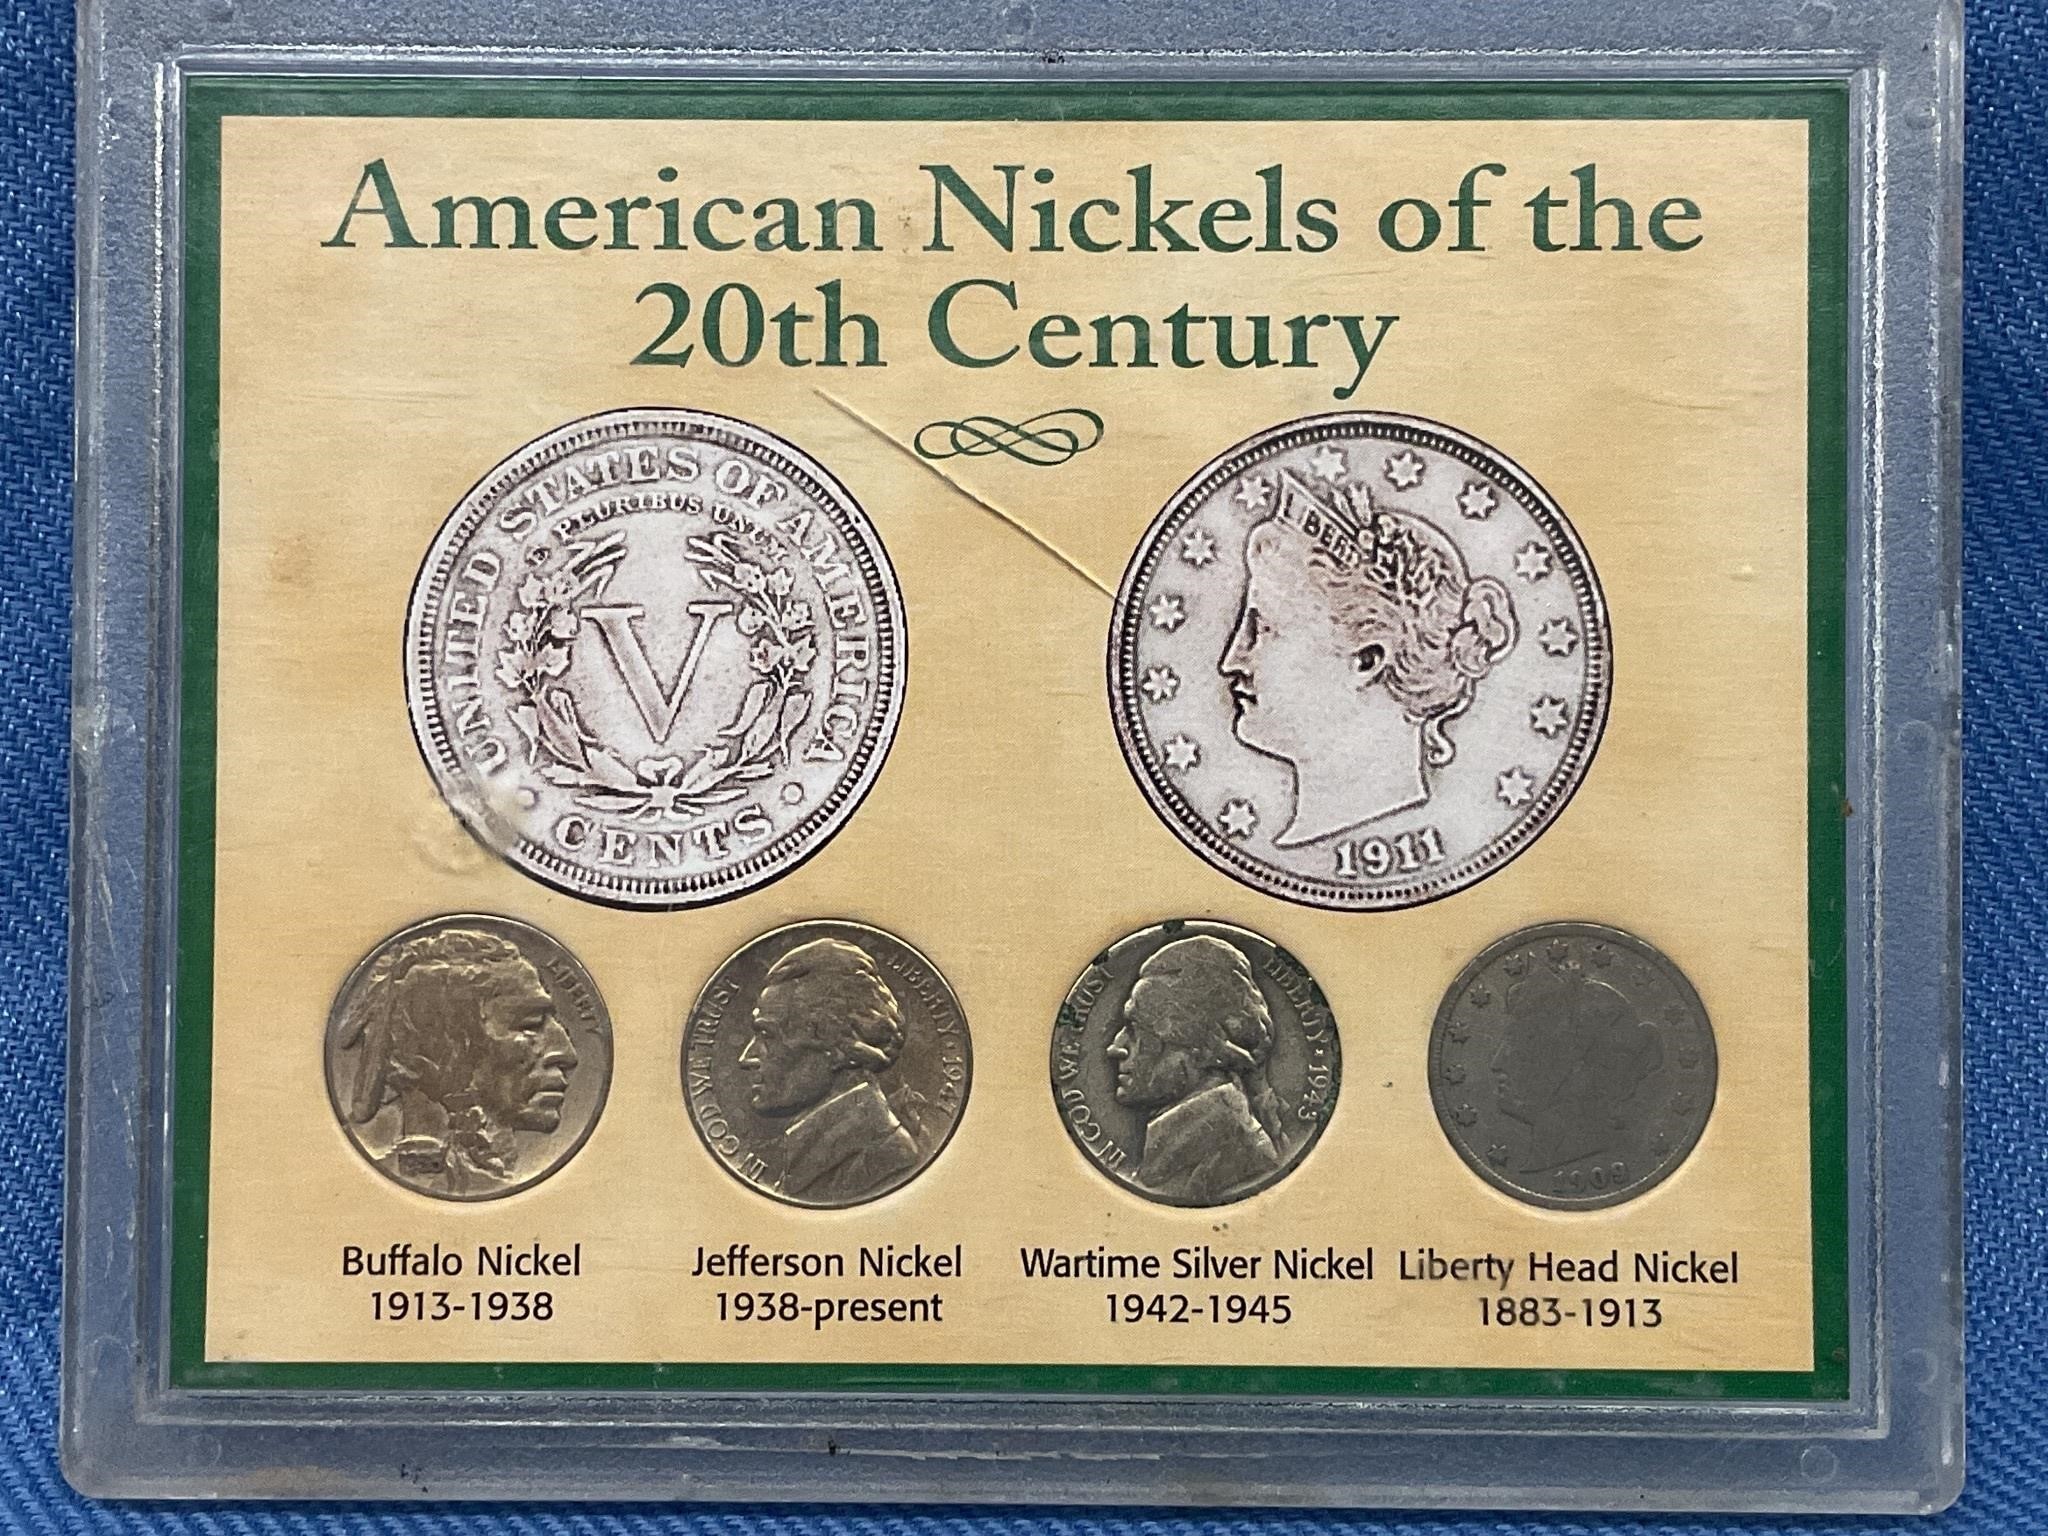 American nickels of the 20th century